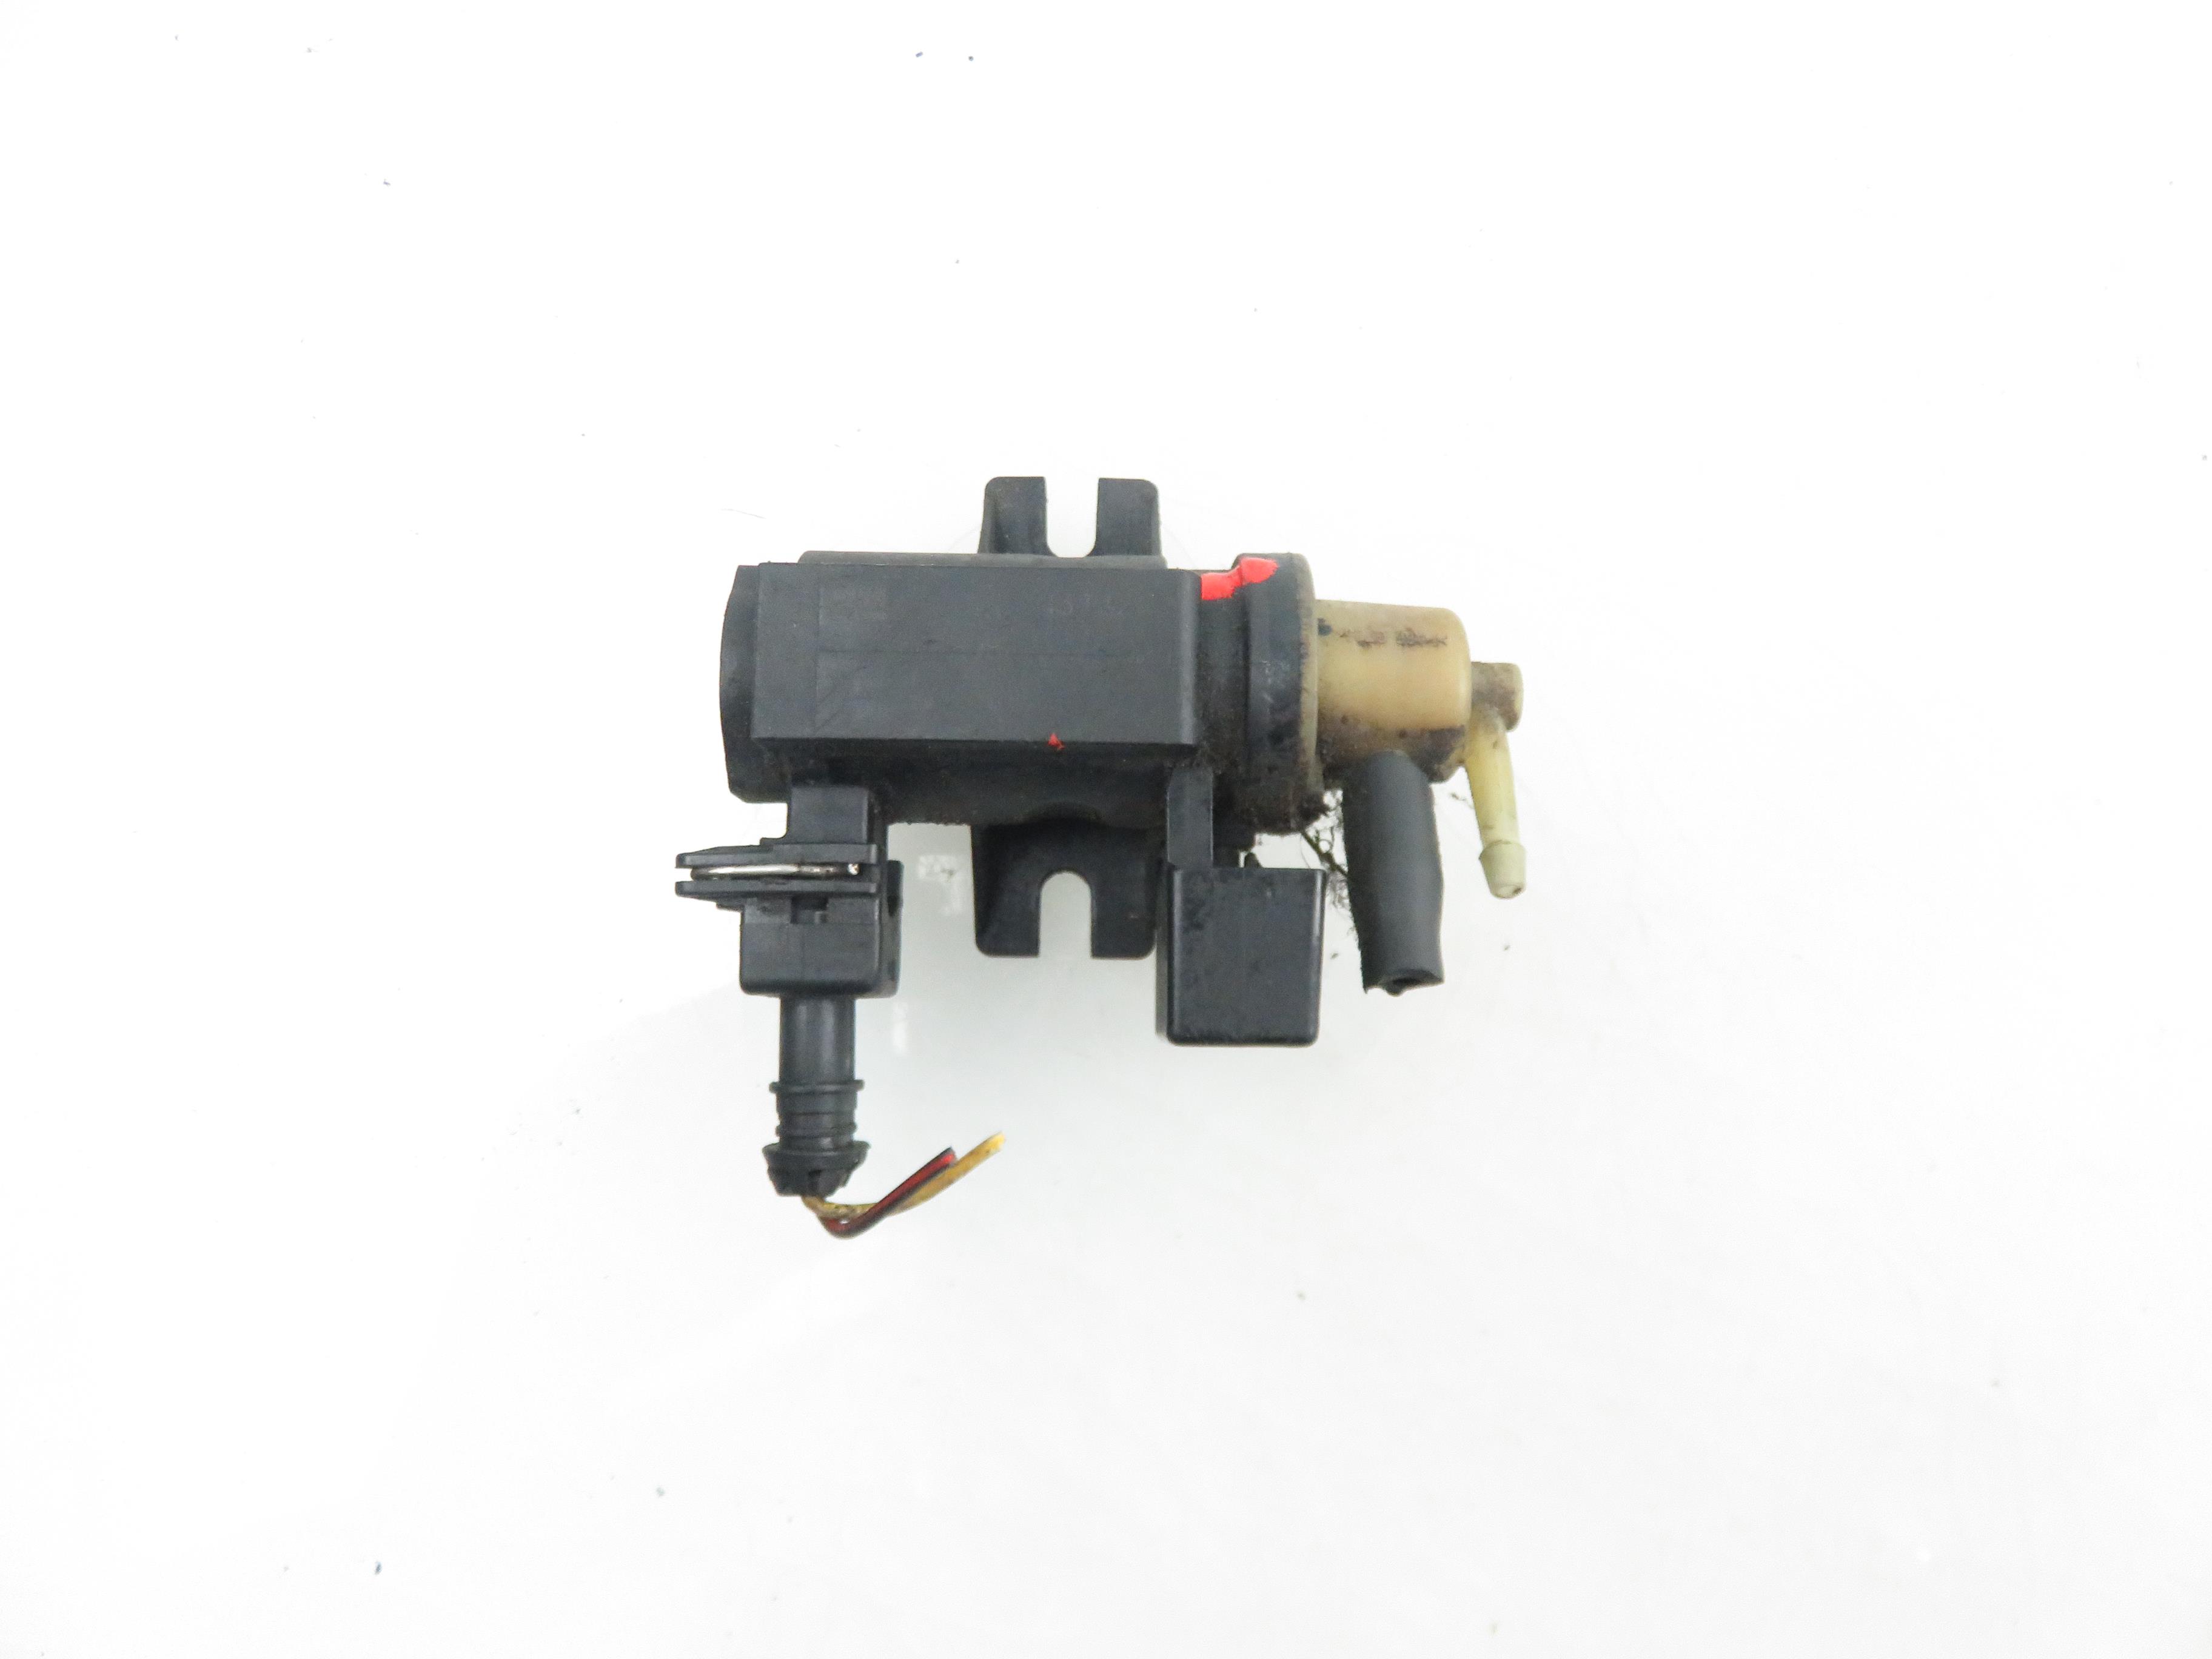 OPEL Astra H (2004-2014) Electromagnetic valve 55566898 21229784